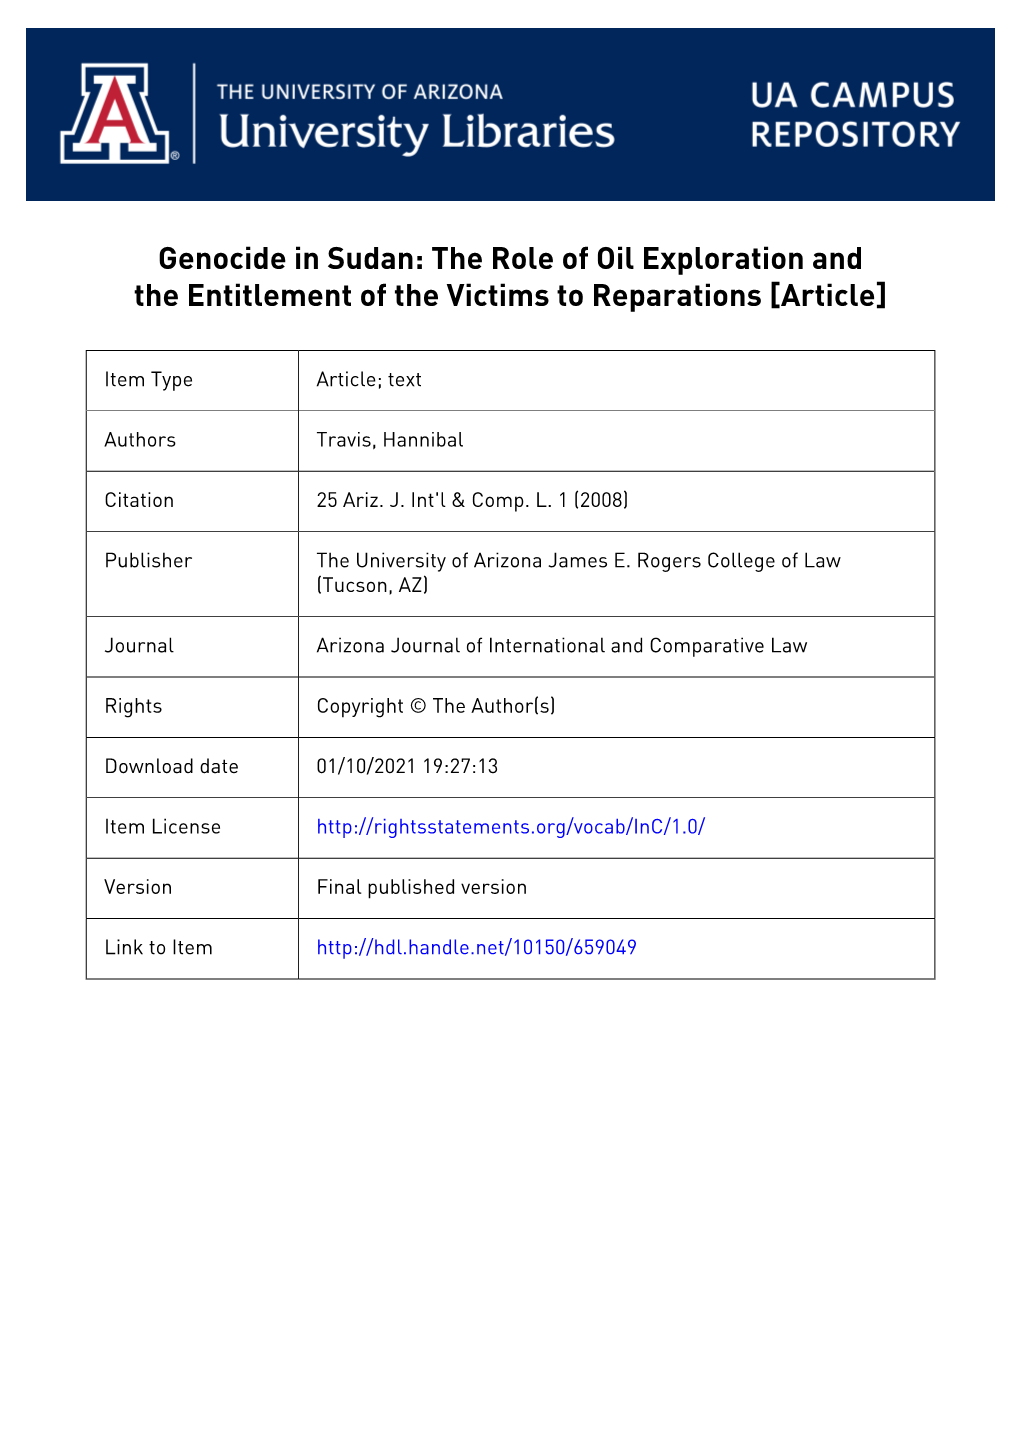 Genocide in Sudan: the Role of Oil Exploration and the Entitlement of the Victims to Reparations [Article]